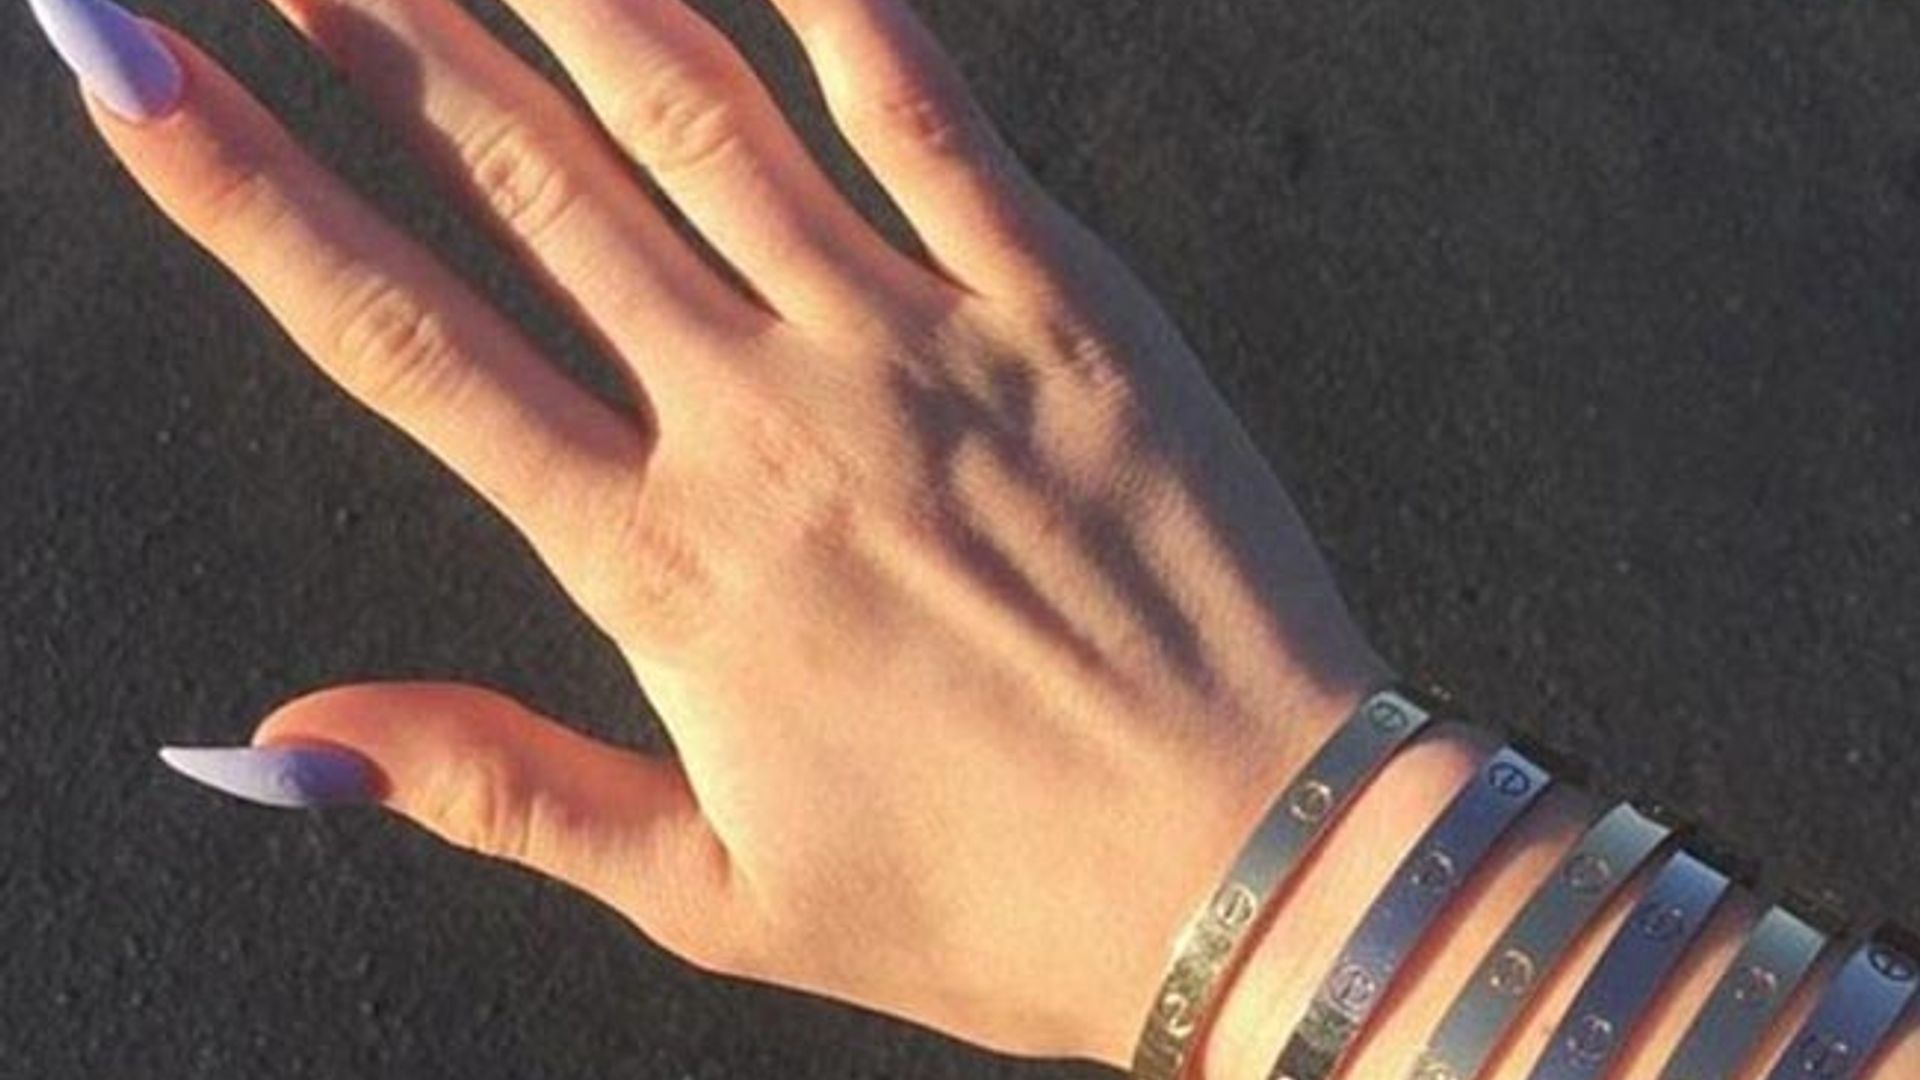 15-Year-Old Kylie Jenner Wears Super-Skimpy Outfit and Four Cartier Love  Bracelets